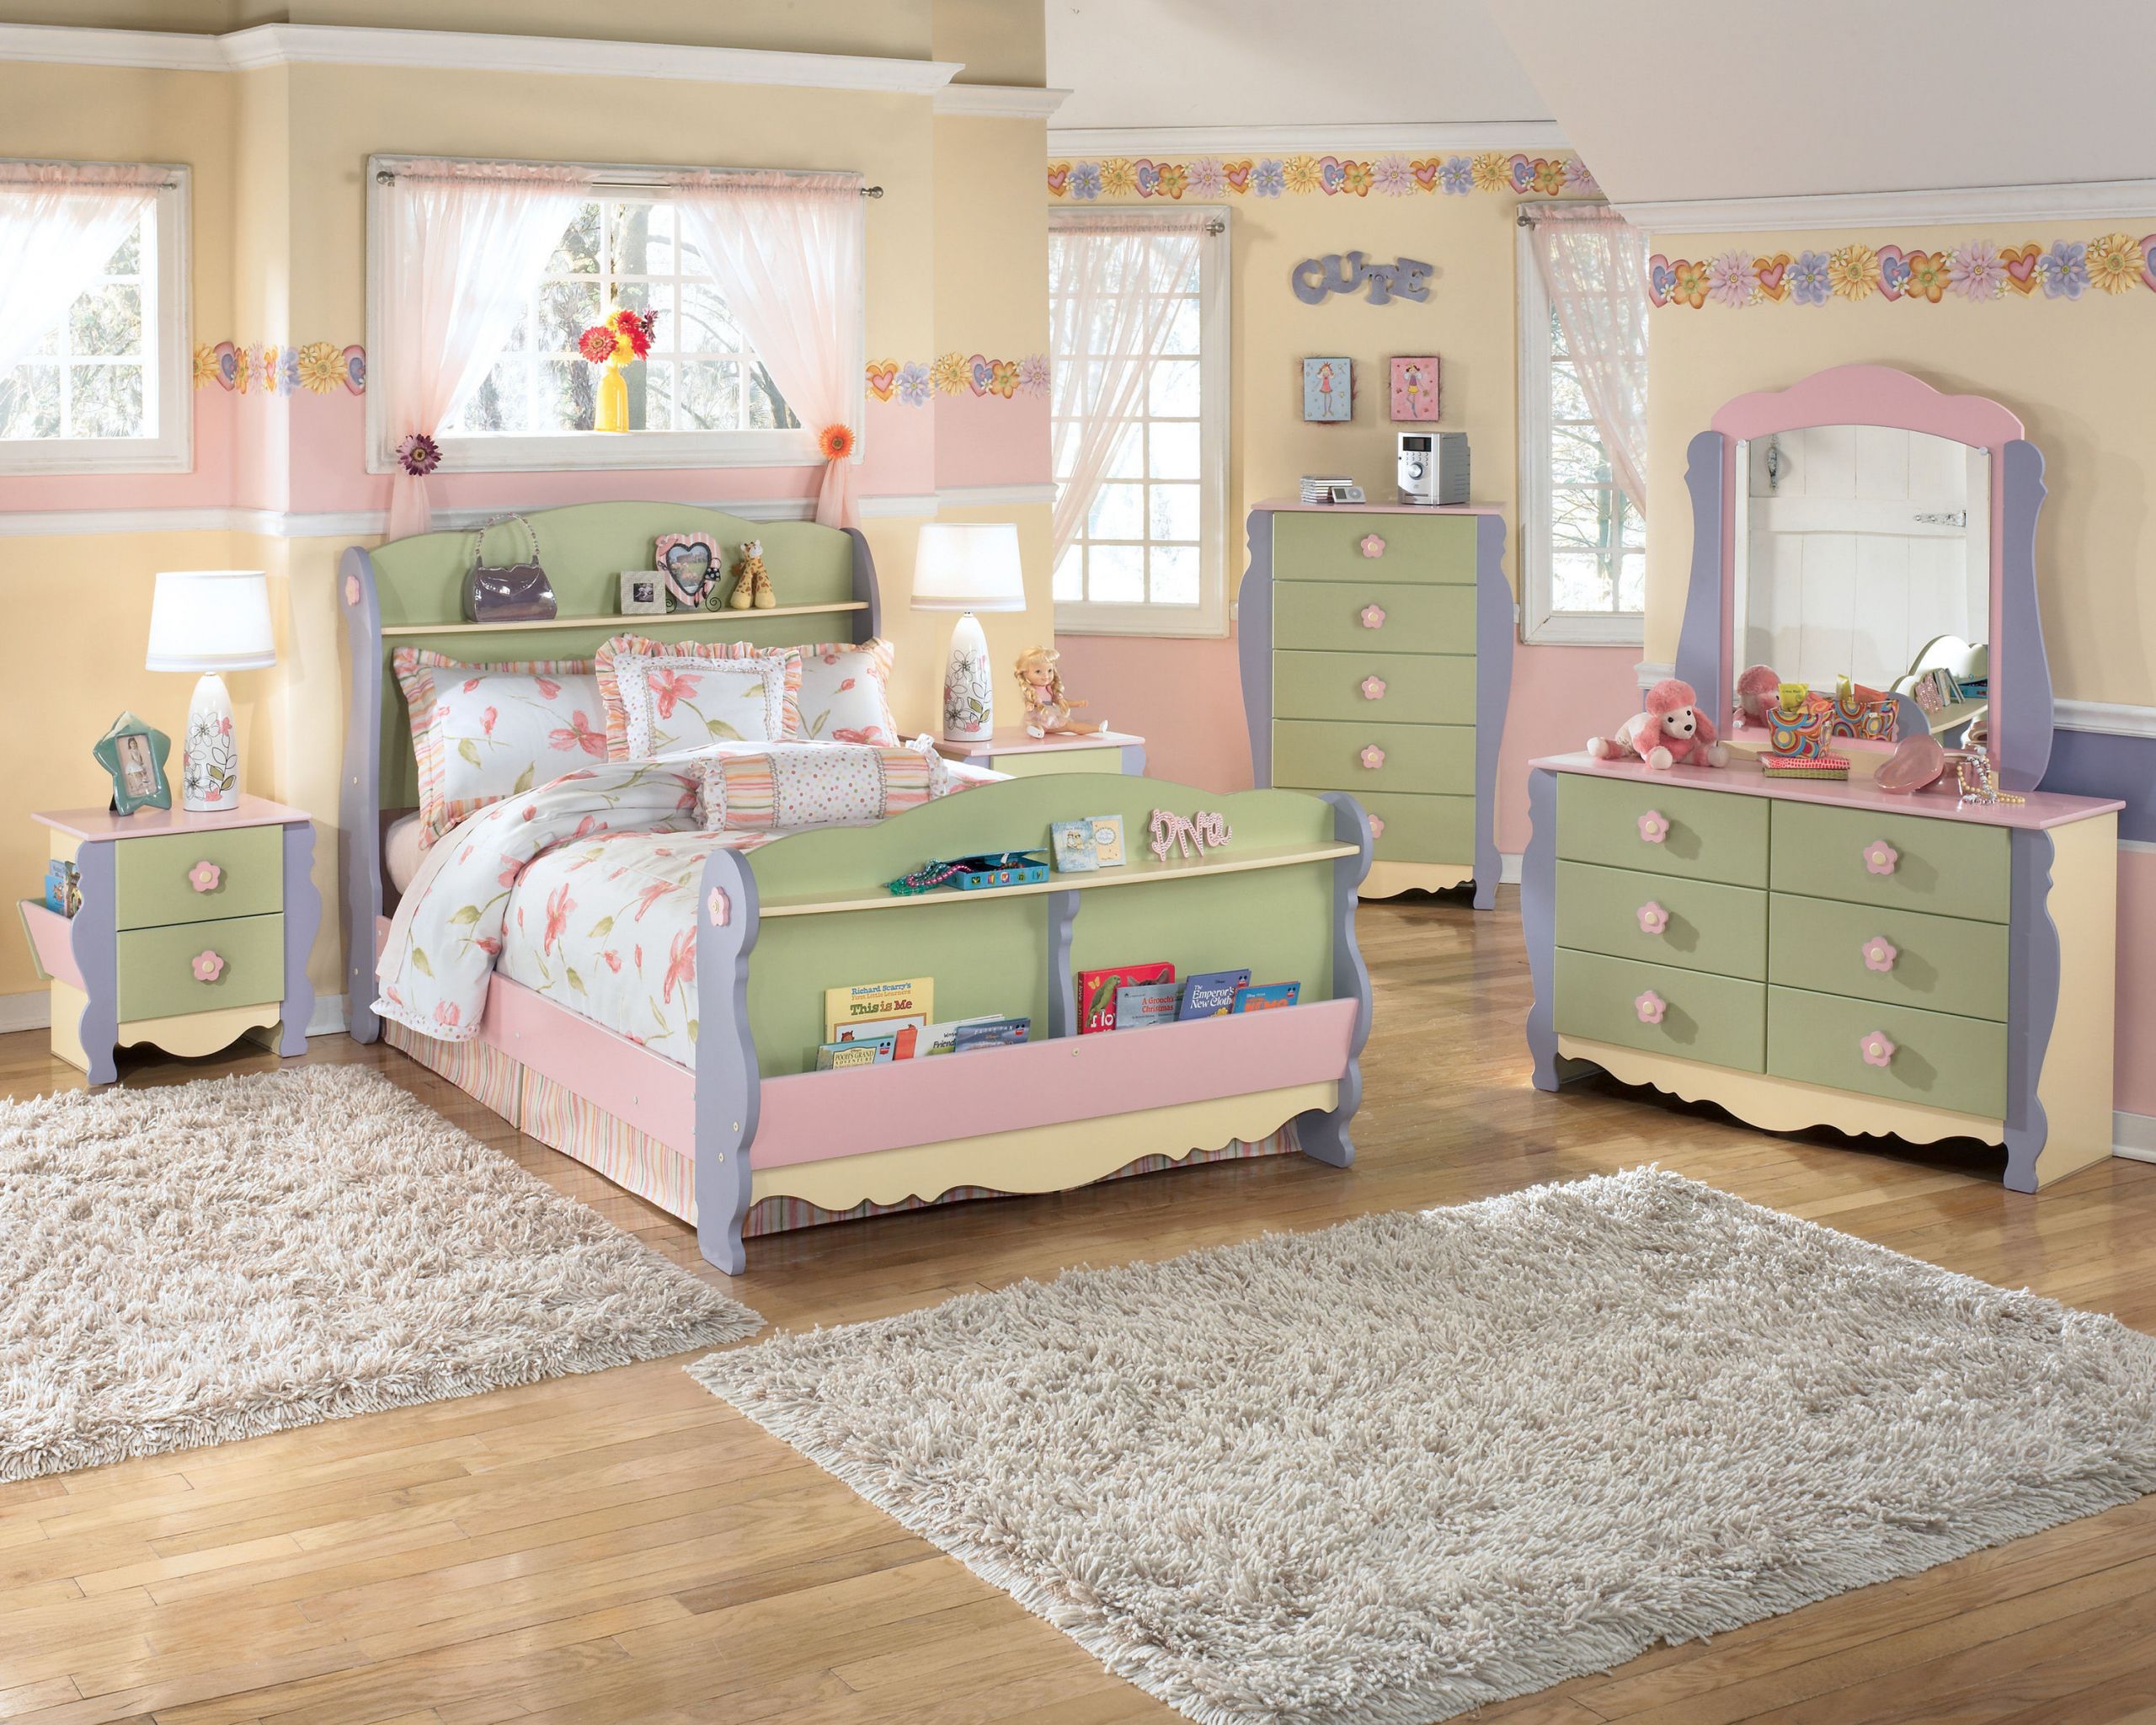 Kids Twin Bedroom Set
 Doll House 4Pc Kids Bedroom Set with Twin Bed